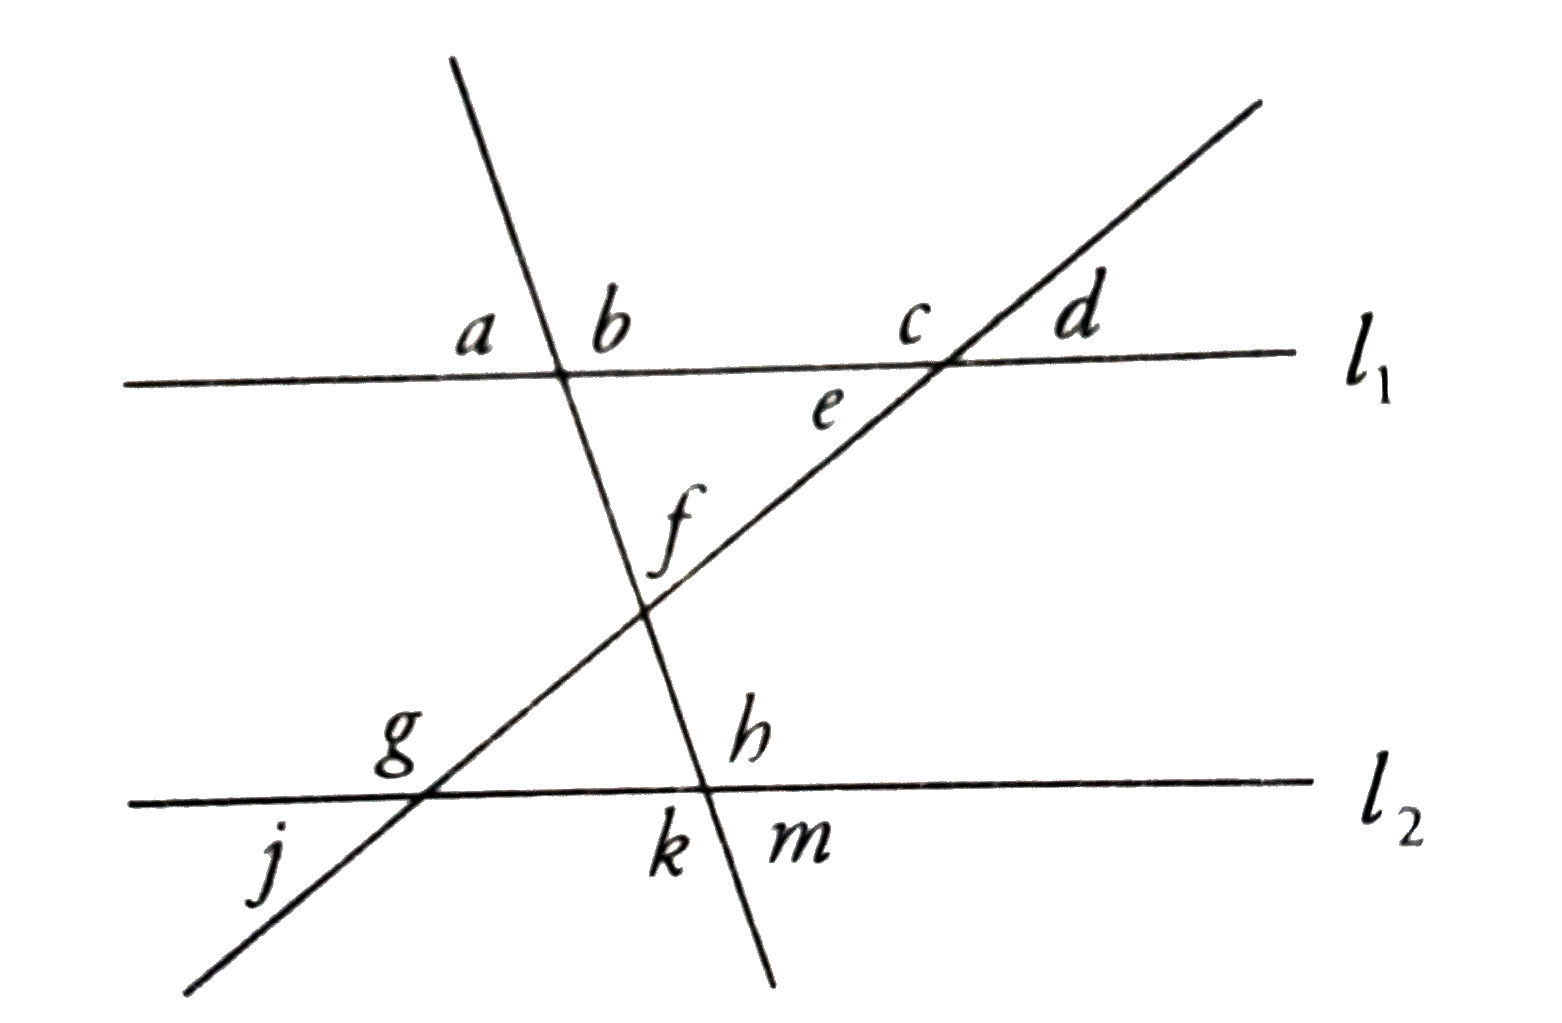 In the figure above, I(1) is parallel to l(2). Which of the following angles are NOT equal?